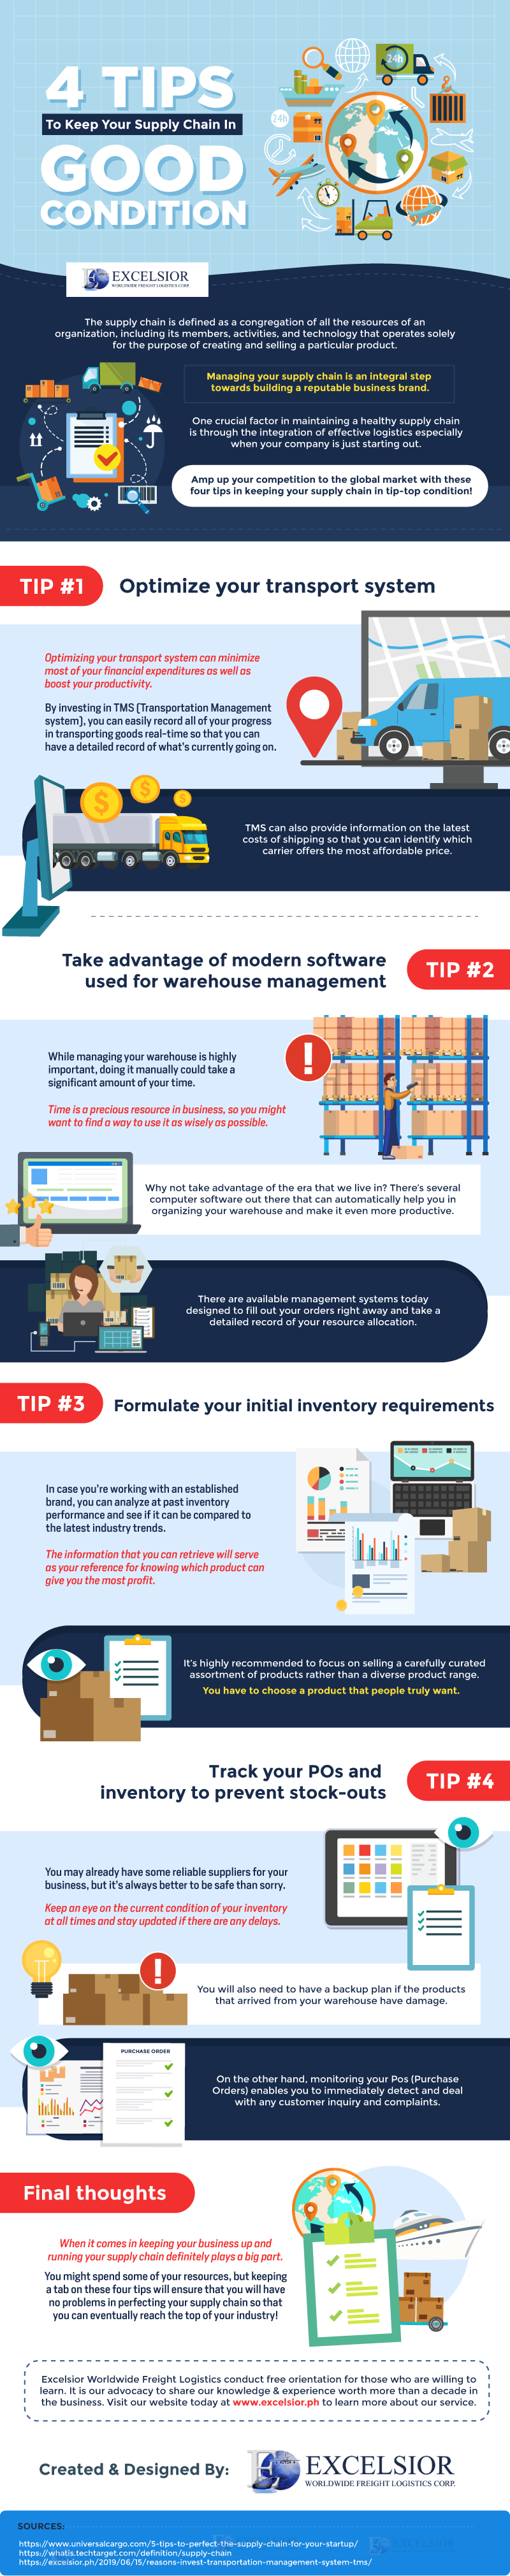 4 Tips to Keep your Supply Chain in Good Condition - Infographic